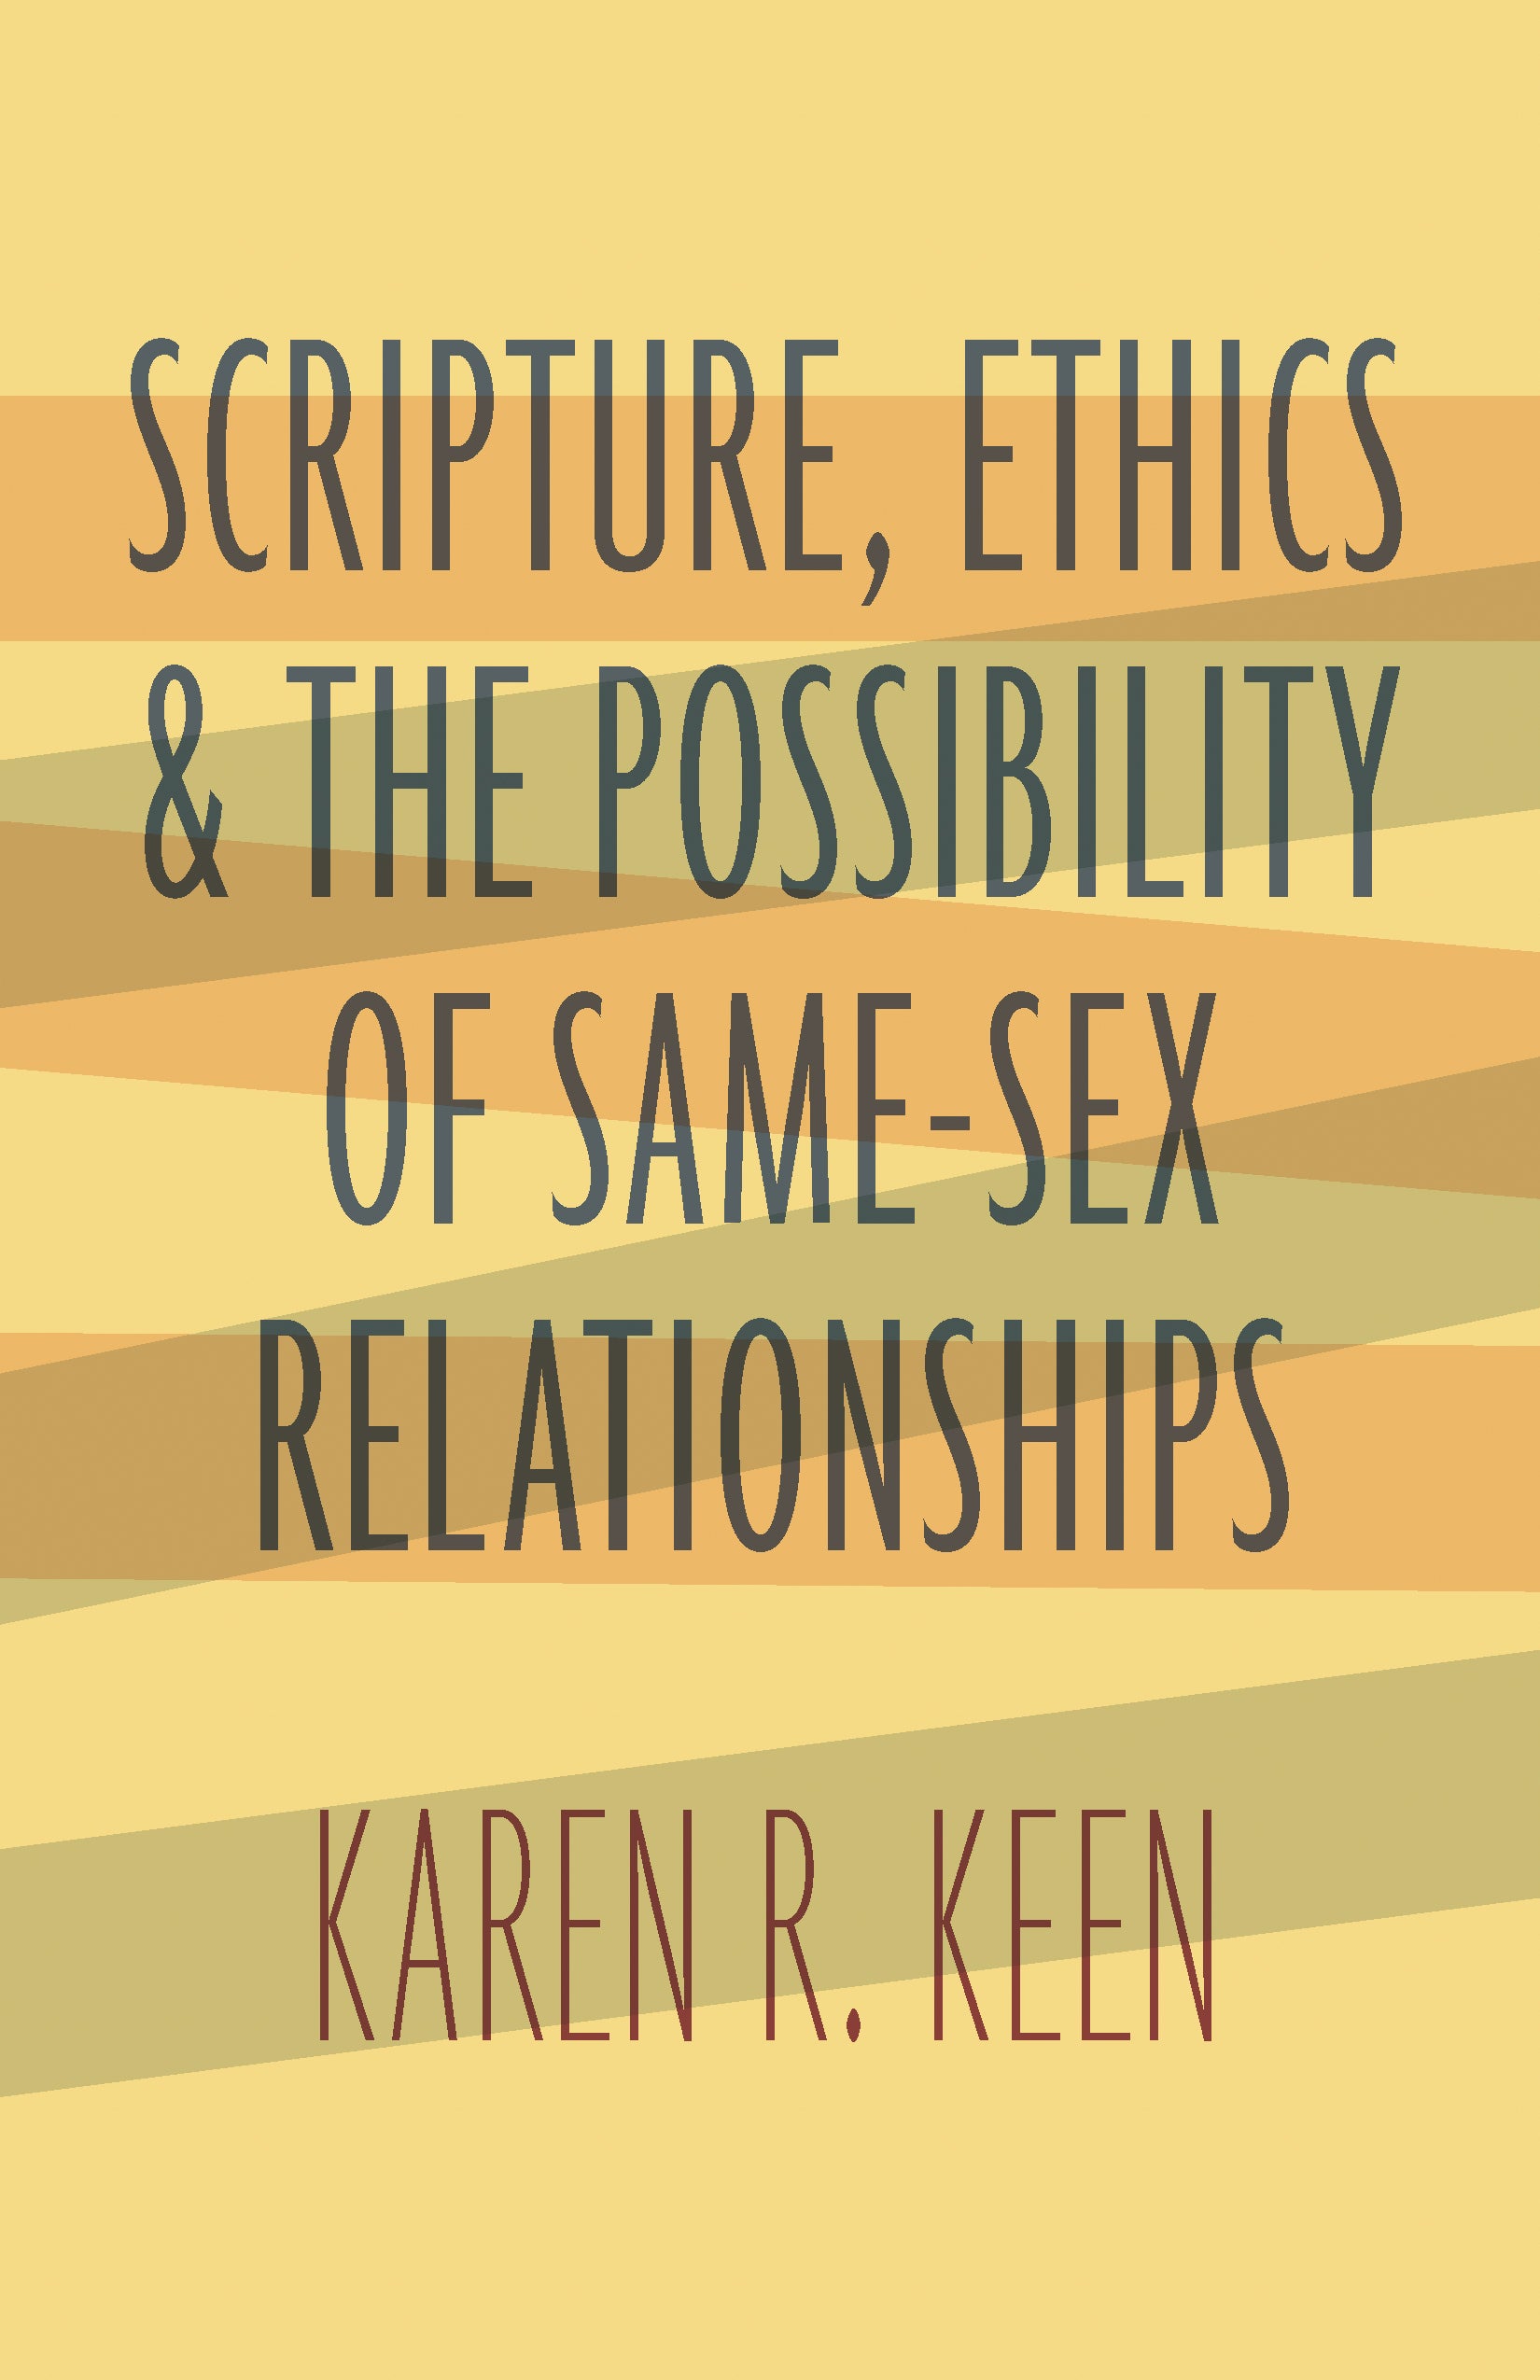 Image of Scripture, Ethics, and the Possibility of Same-Sex Relationships other